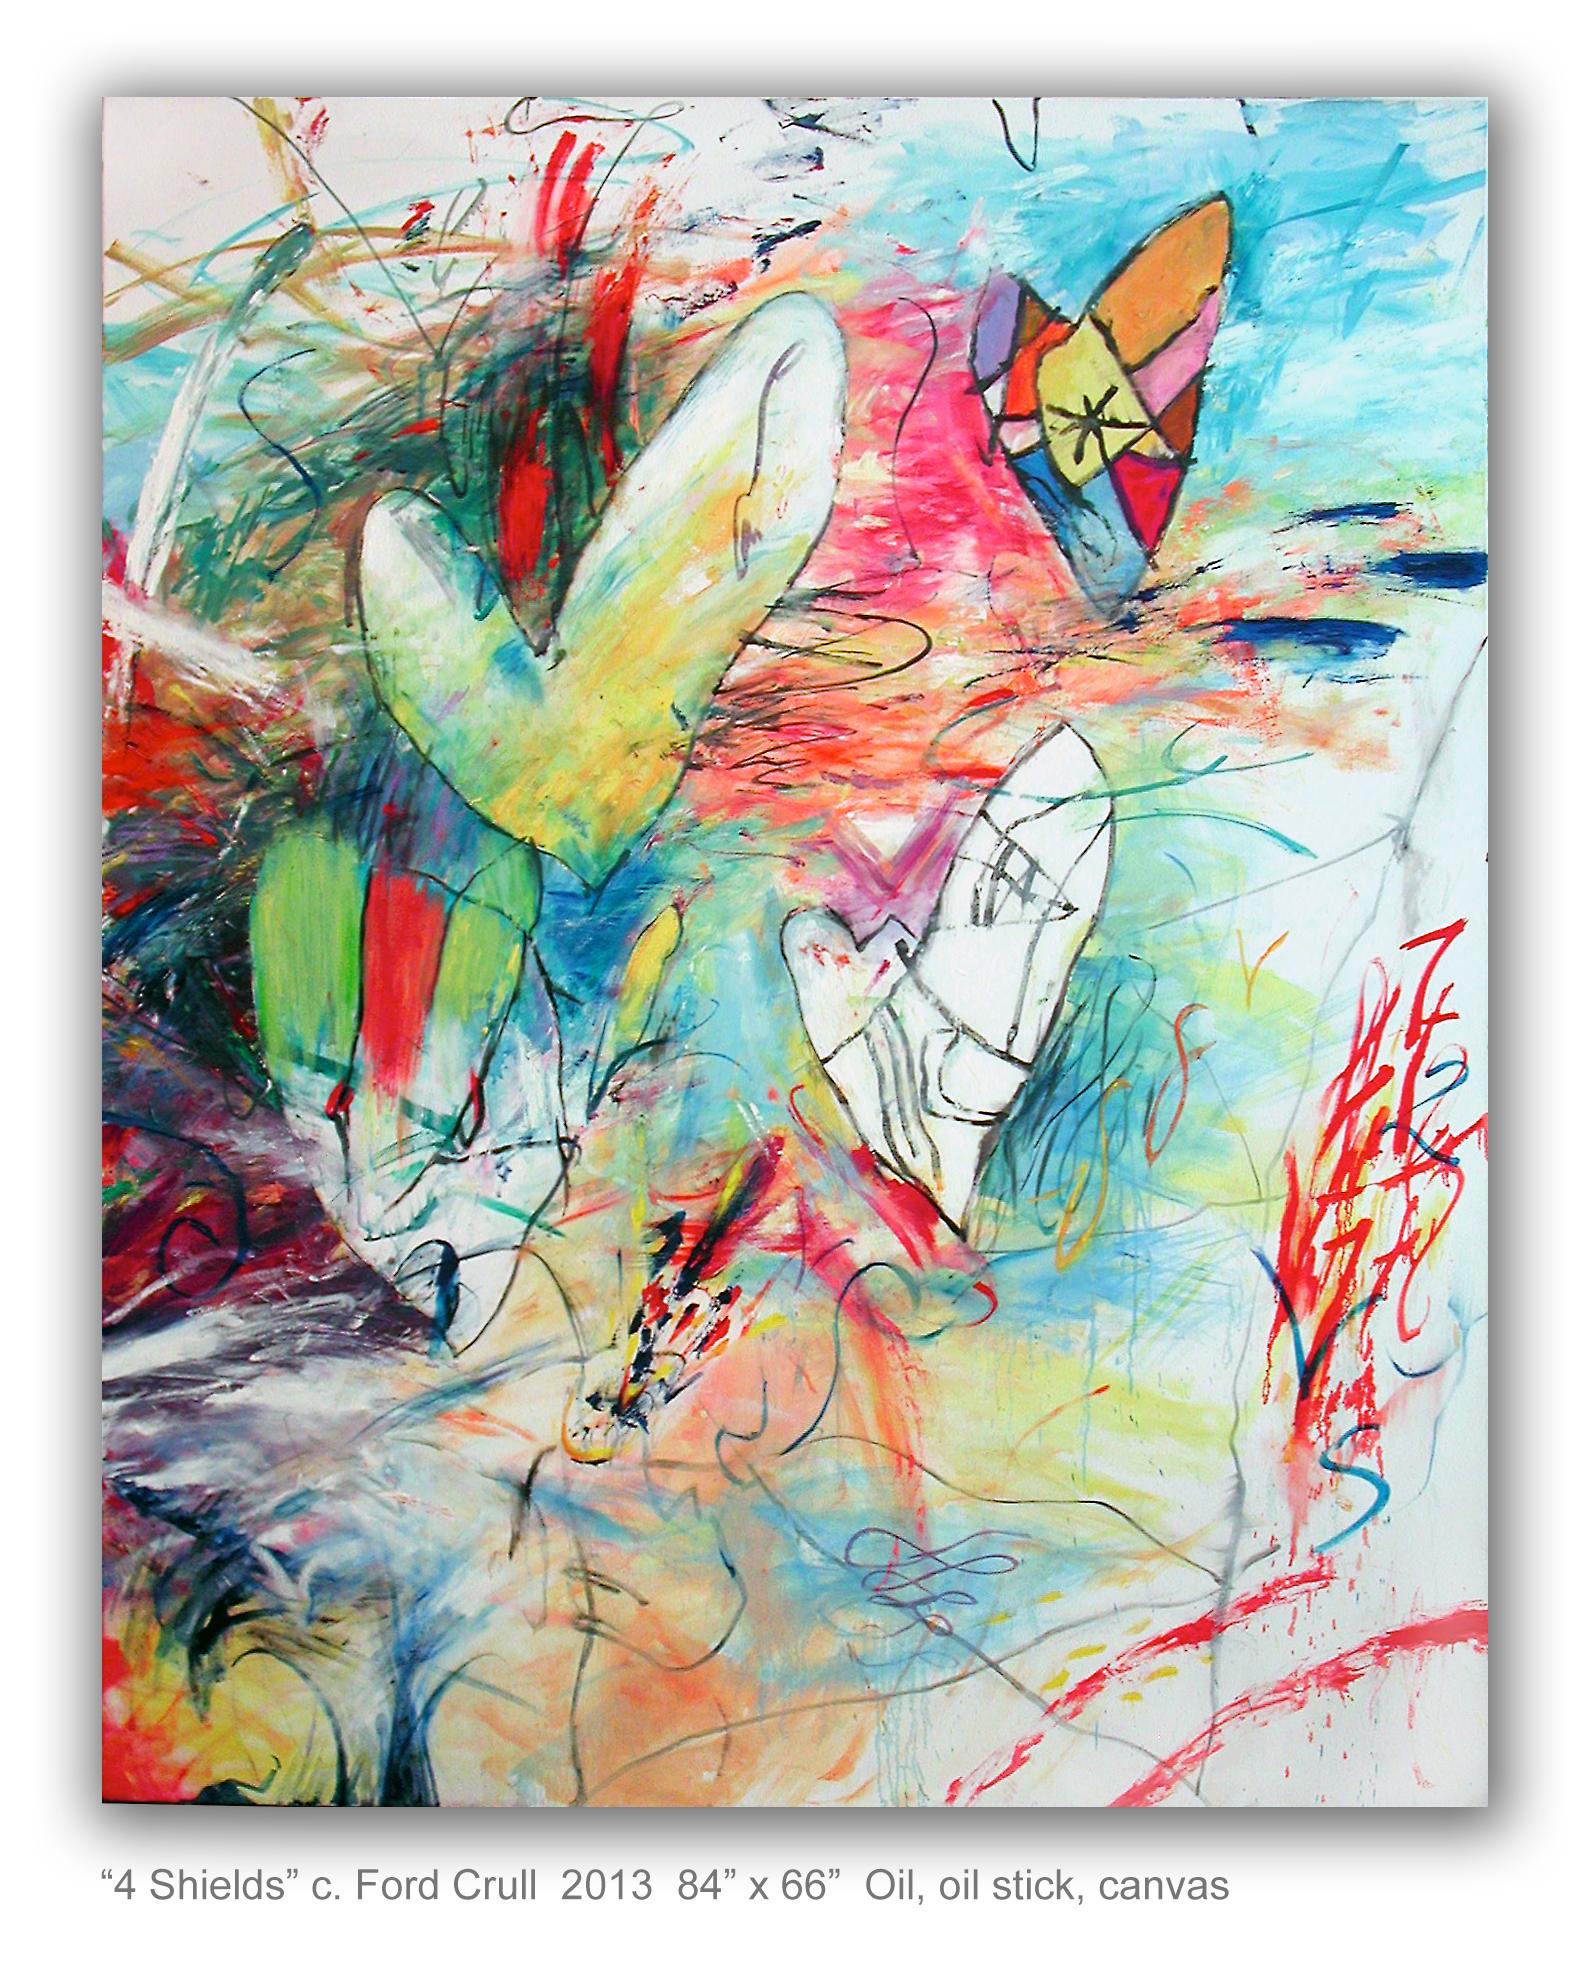 Ford Crull Abstract Painting - 4 SHIELDS - large colorful abstract painting with hearts and symbols